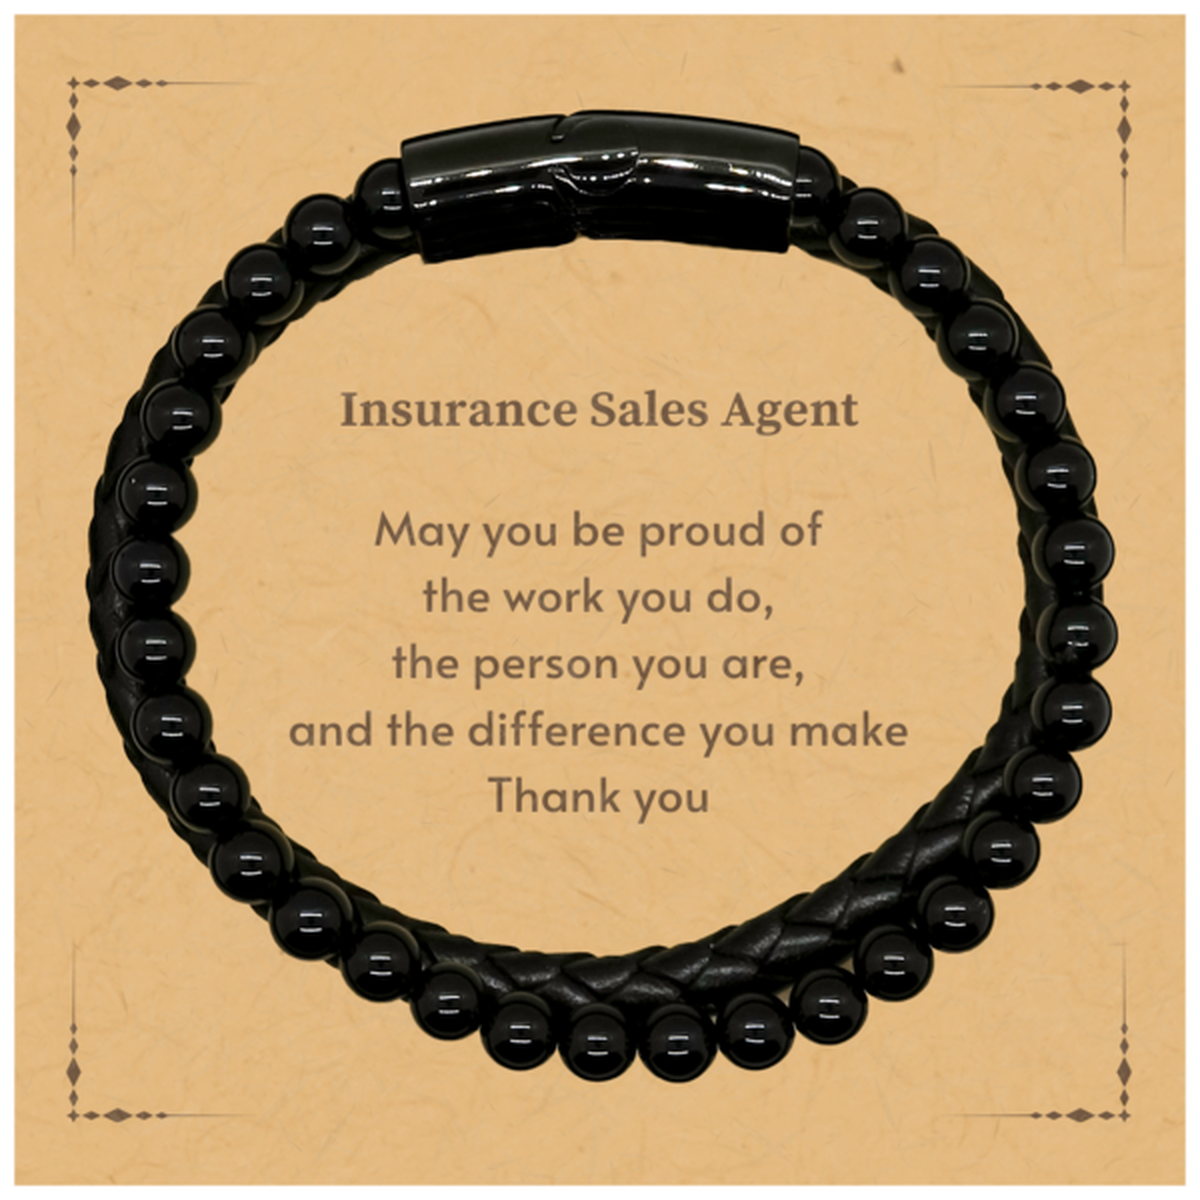 Heartwarming Stone Leather Bracelets Retirement Coworkers Gifts for Insurance Sales Agent, Insurance Sales Agent May You be proud of the work you do, the person you are Gifts for Boss Men Women Friends